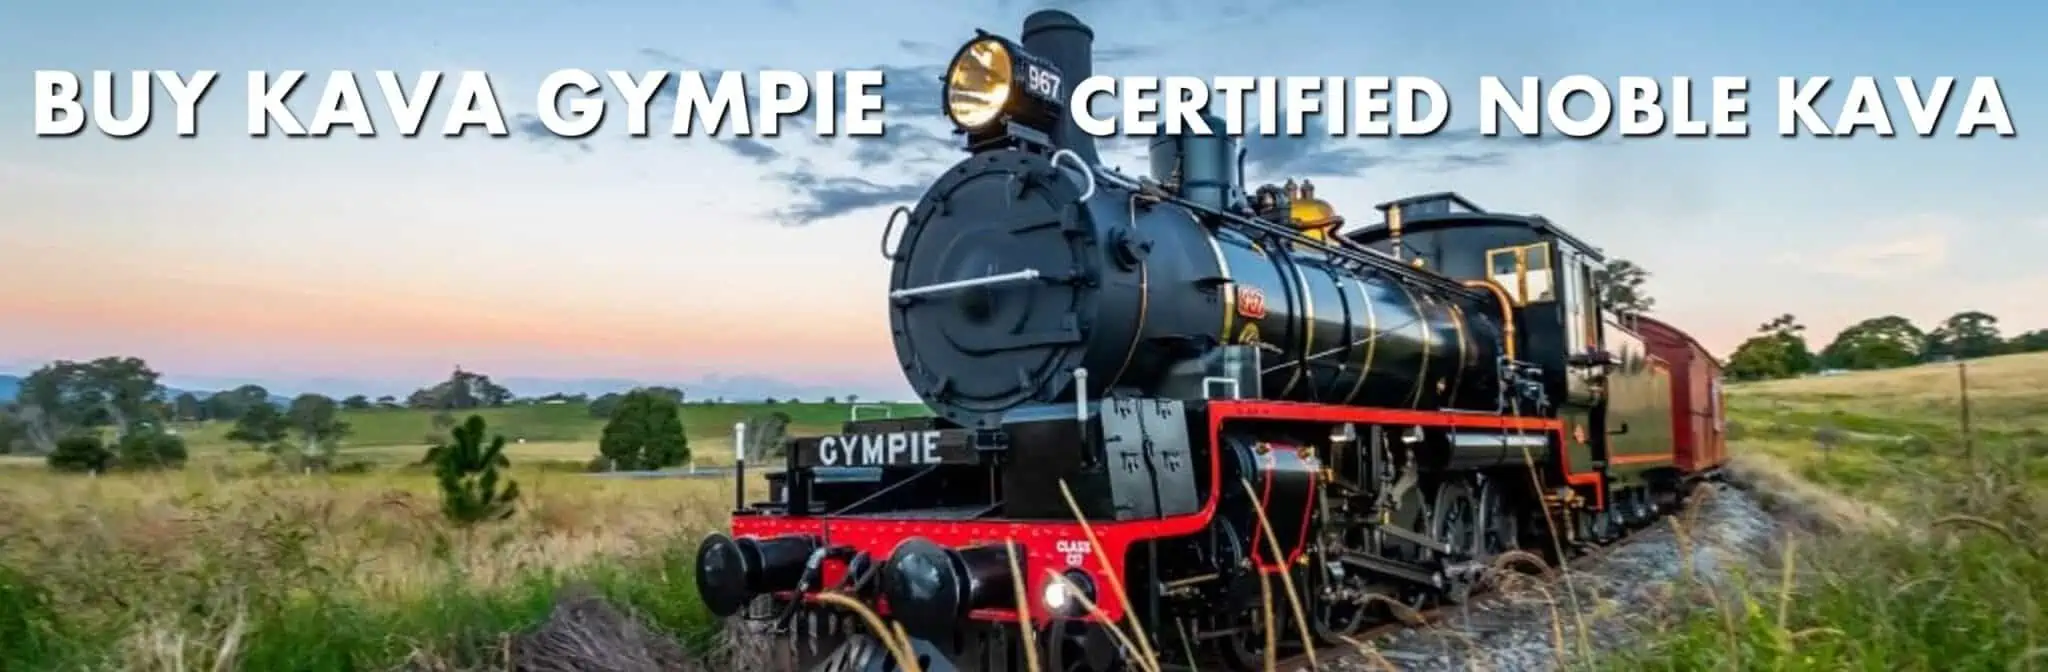 Mary Rattler train in Gympie Queensland with caption Buy Kav Gympie Certified Noble Kava